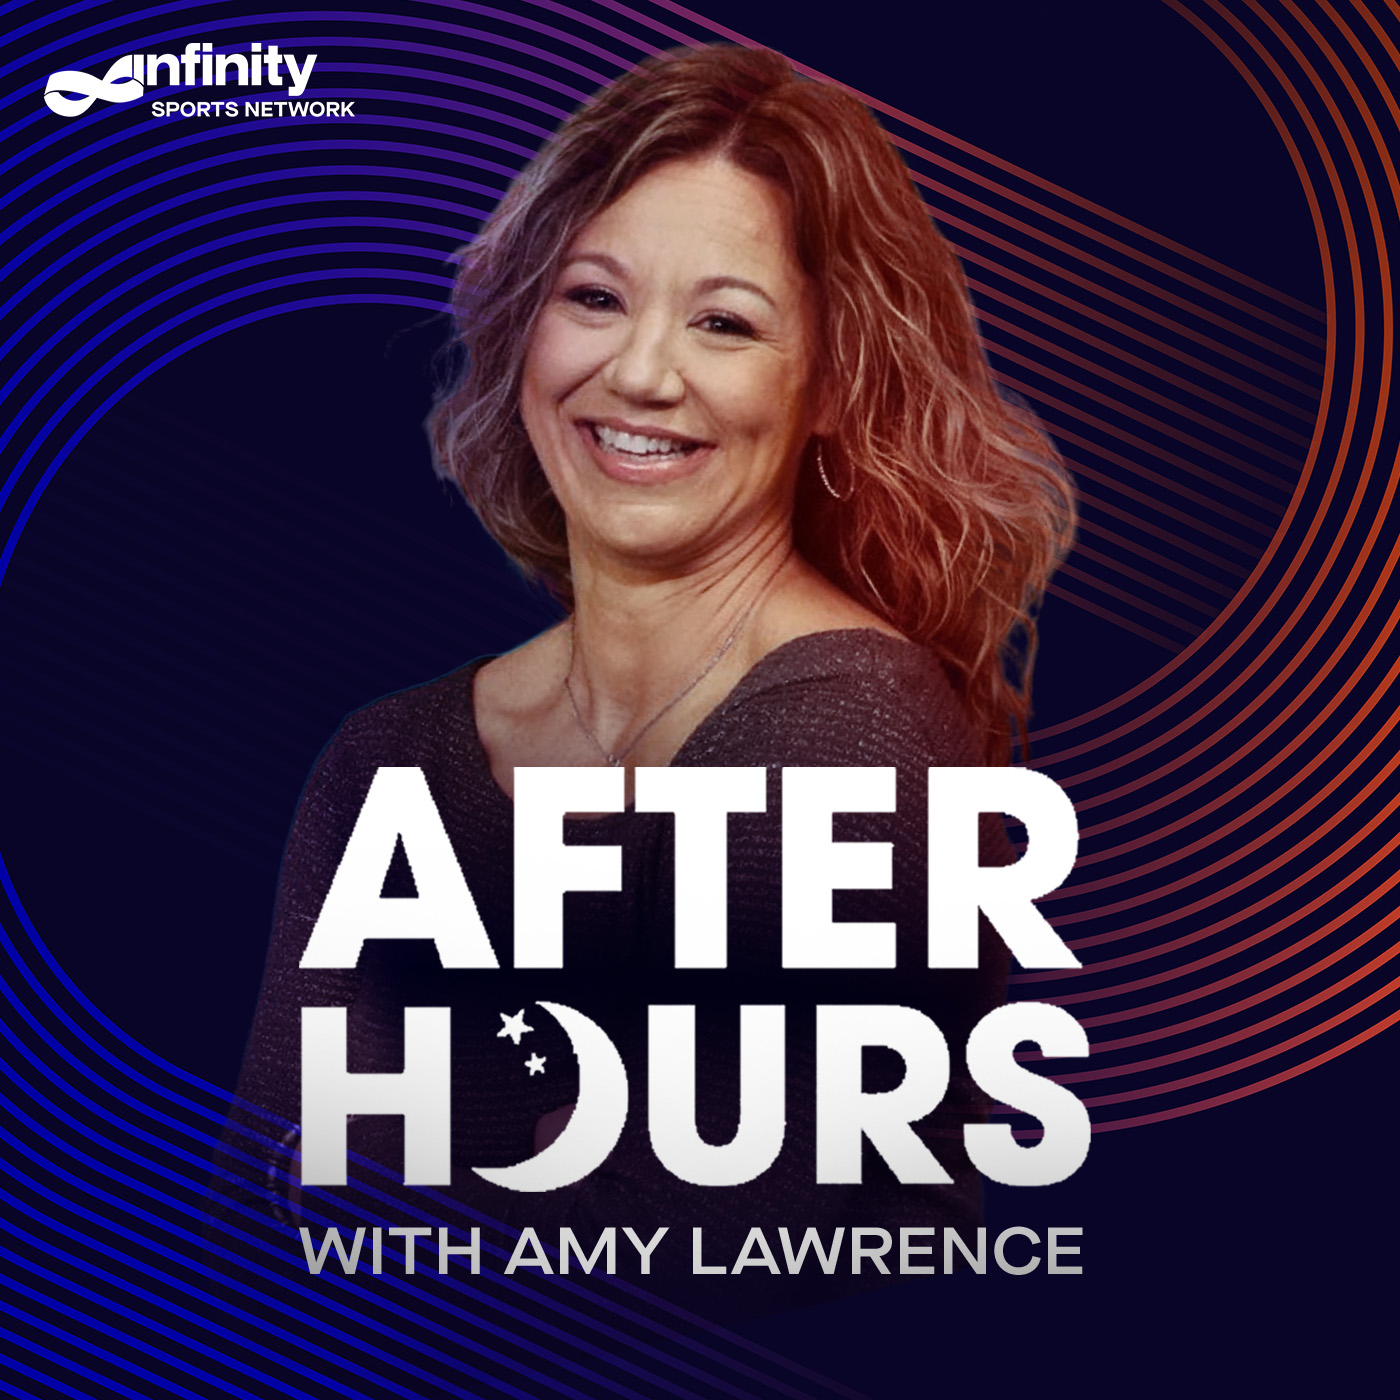 1-31-22 After Hours with Amy Lawrence PODCAST: Hour 2